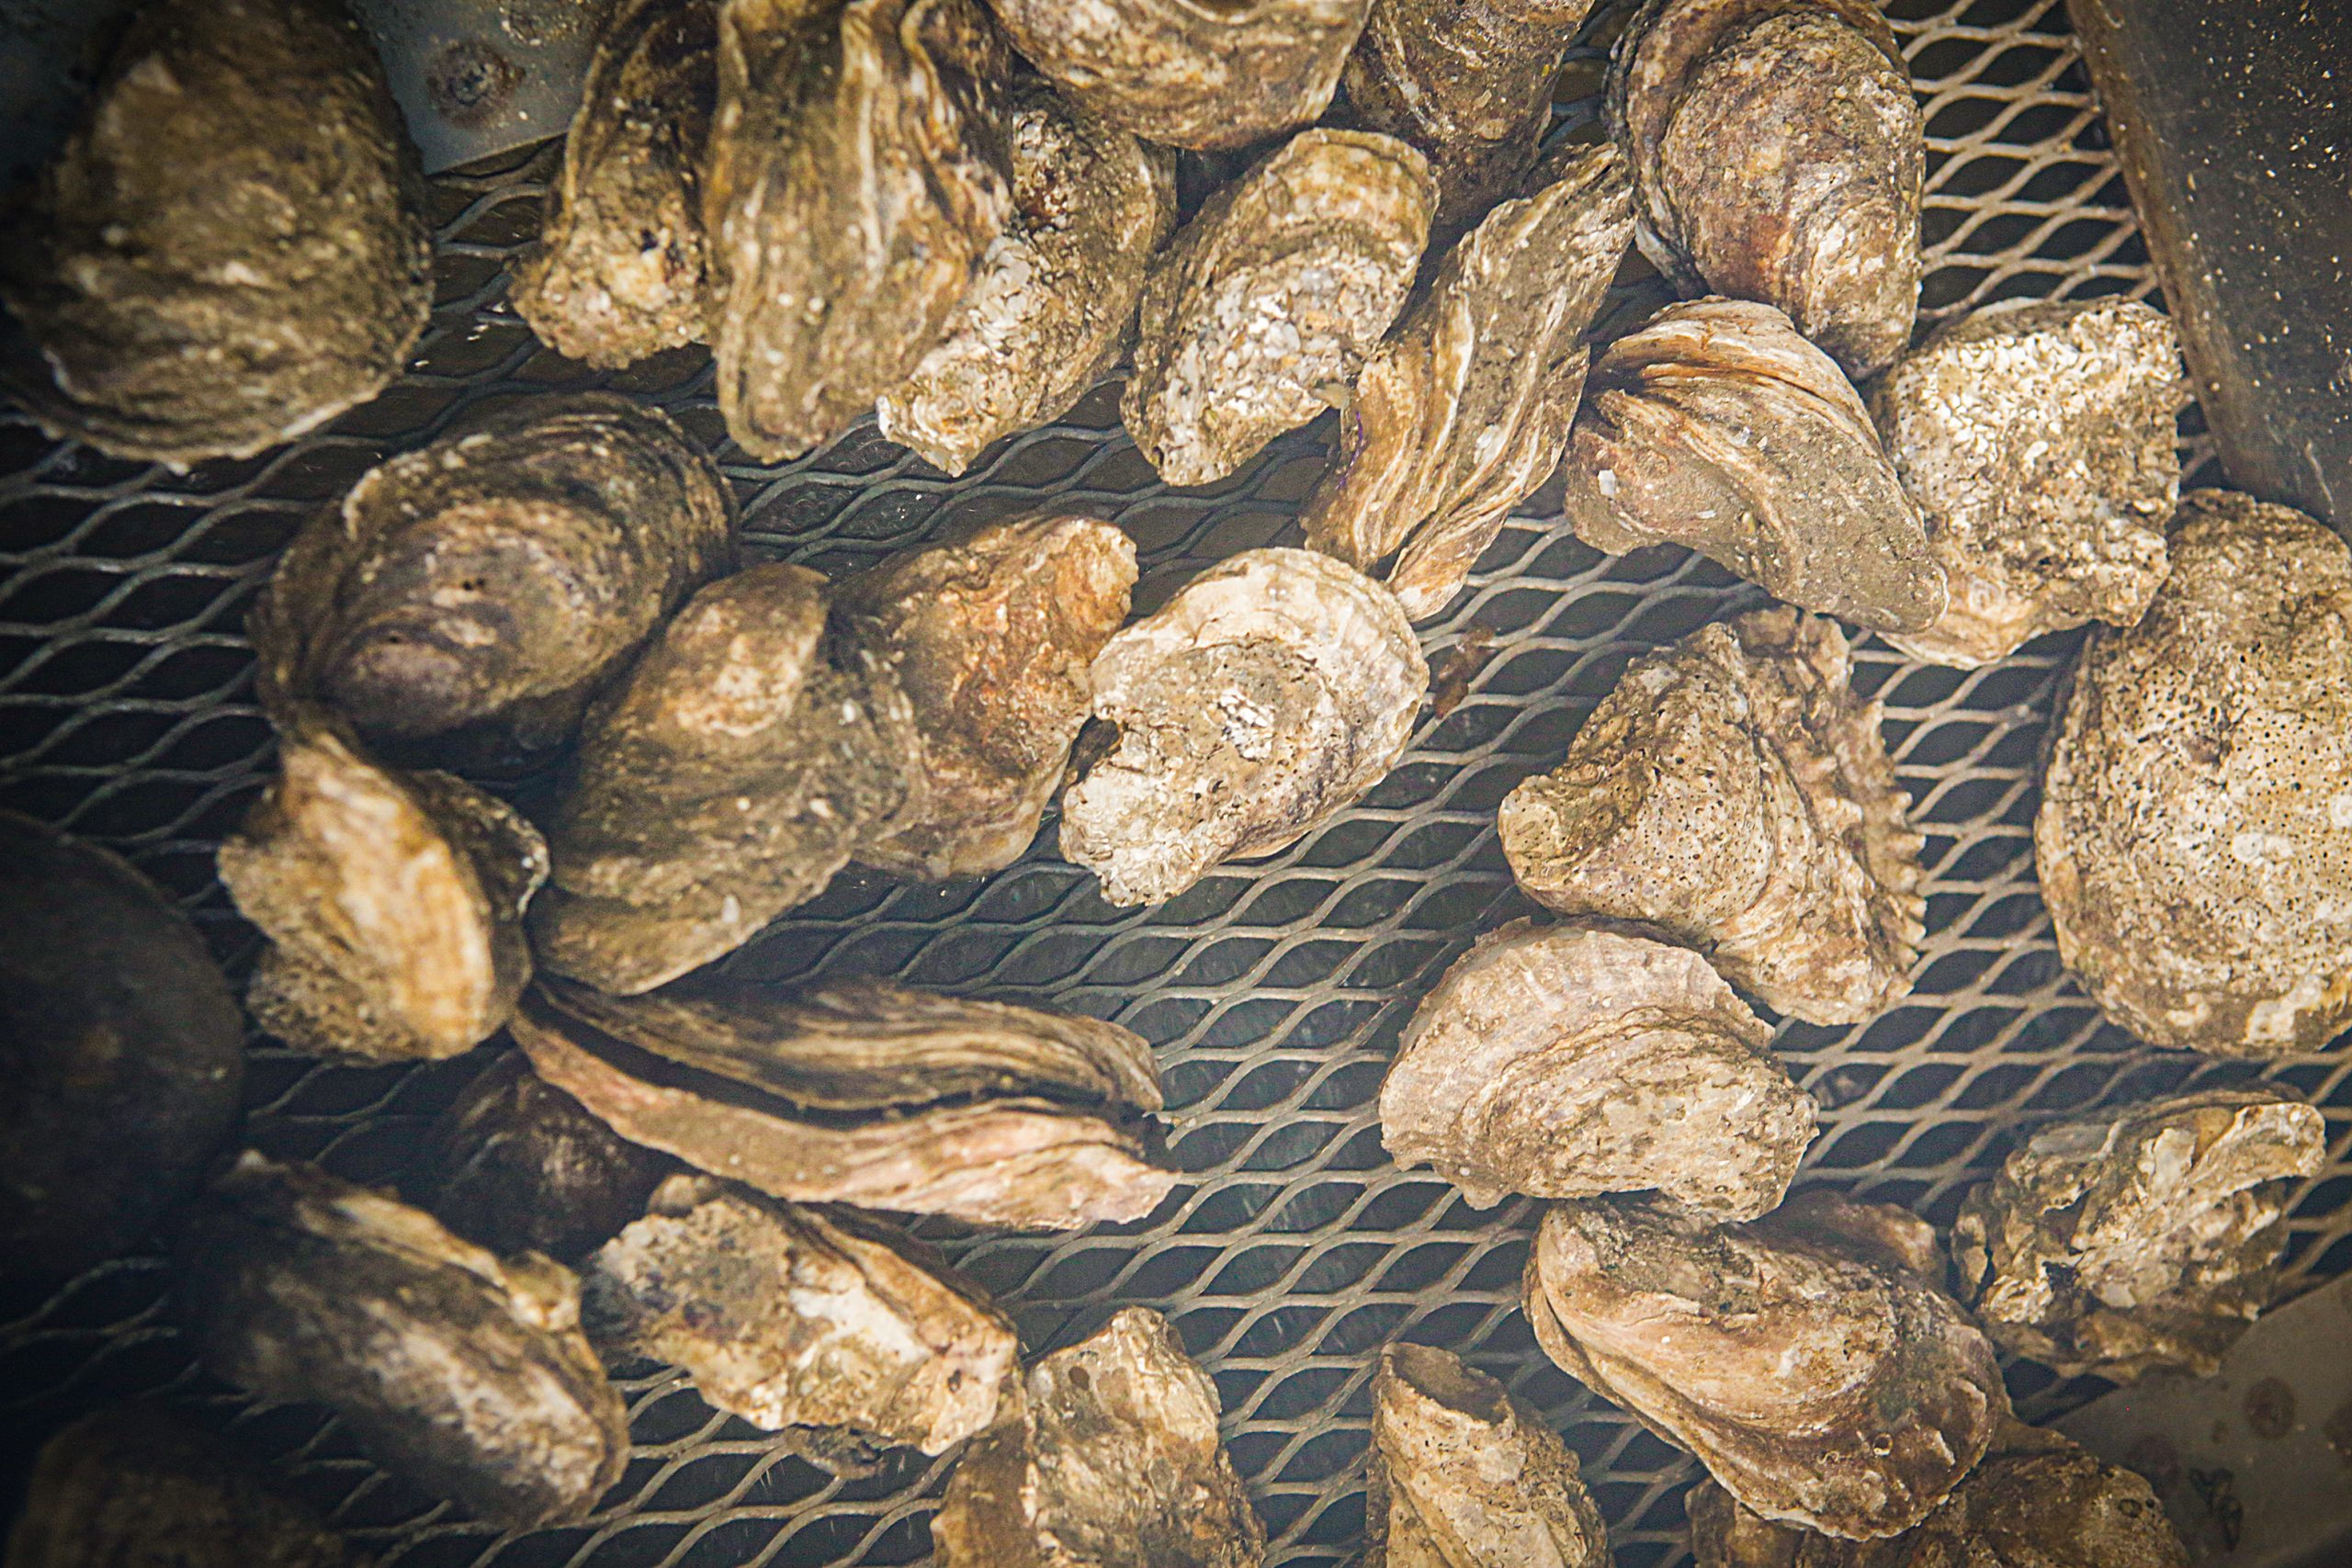 After 12 to 16 months — during which time the oysters are constantly rotated, sorted, and otherwise monitored — harvest time is at hand. These salty delicacies, measuring about 3 inches long, are then distributed to restaurants and retailers.  Photography by Robert Clark